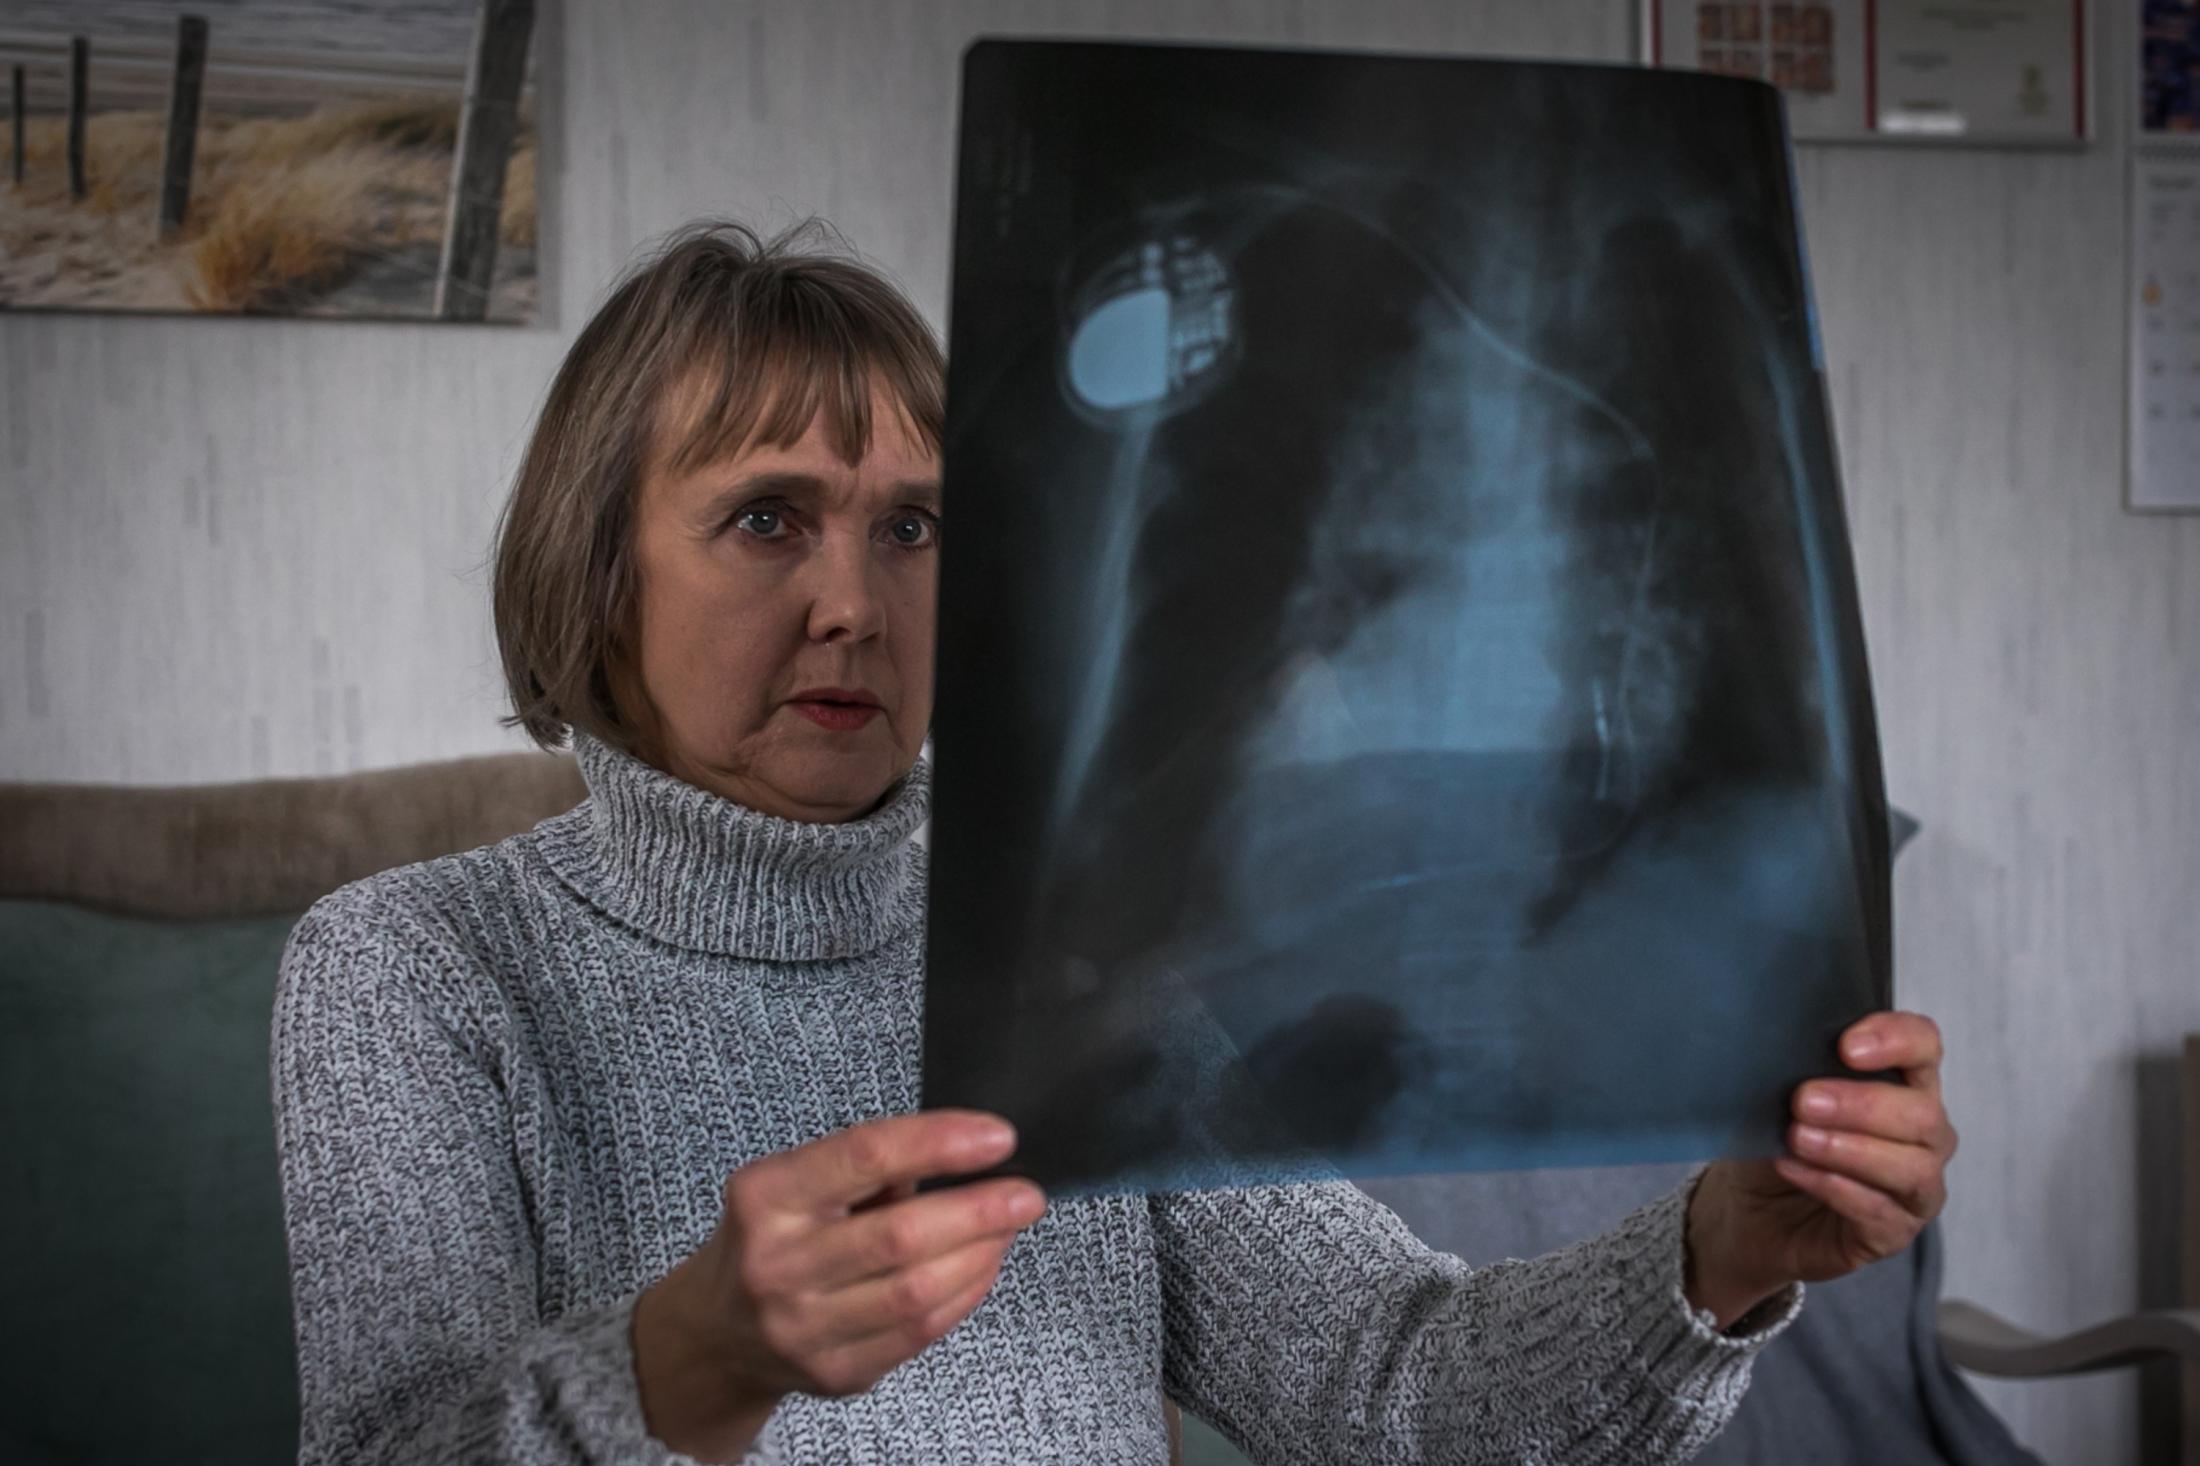 Aleksandr Bedek looks at an x-ray of her mother, who died of lung disease. Aleksandra also has health problems caused by smog in Krakow. 2021, Krak&oacute;w, Poland.